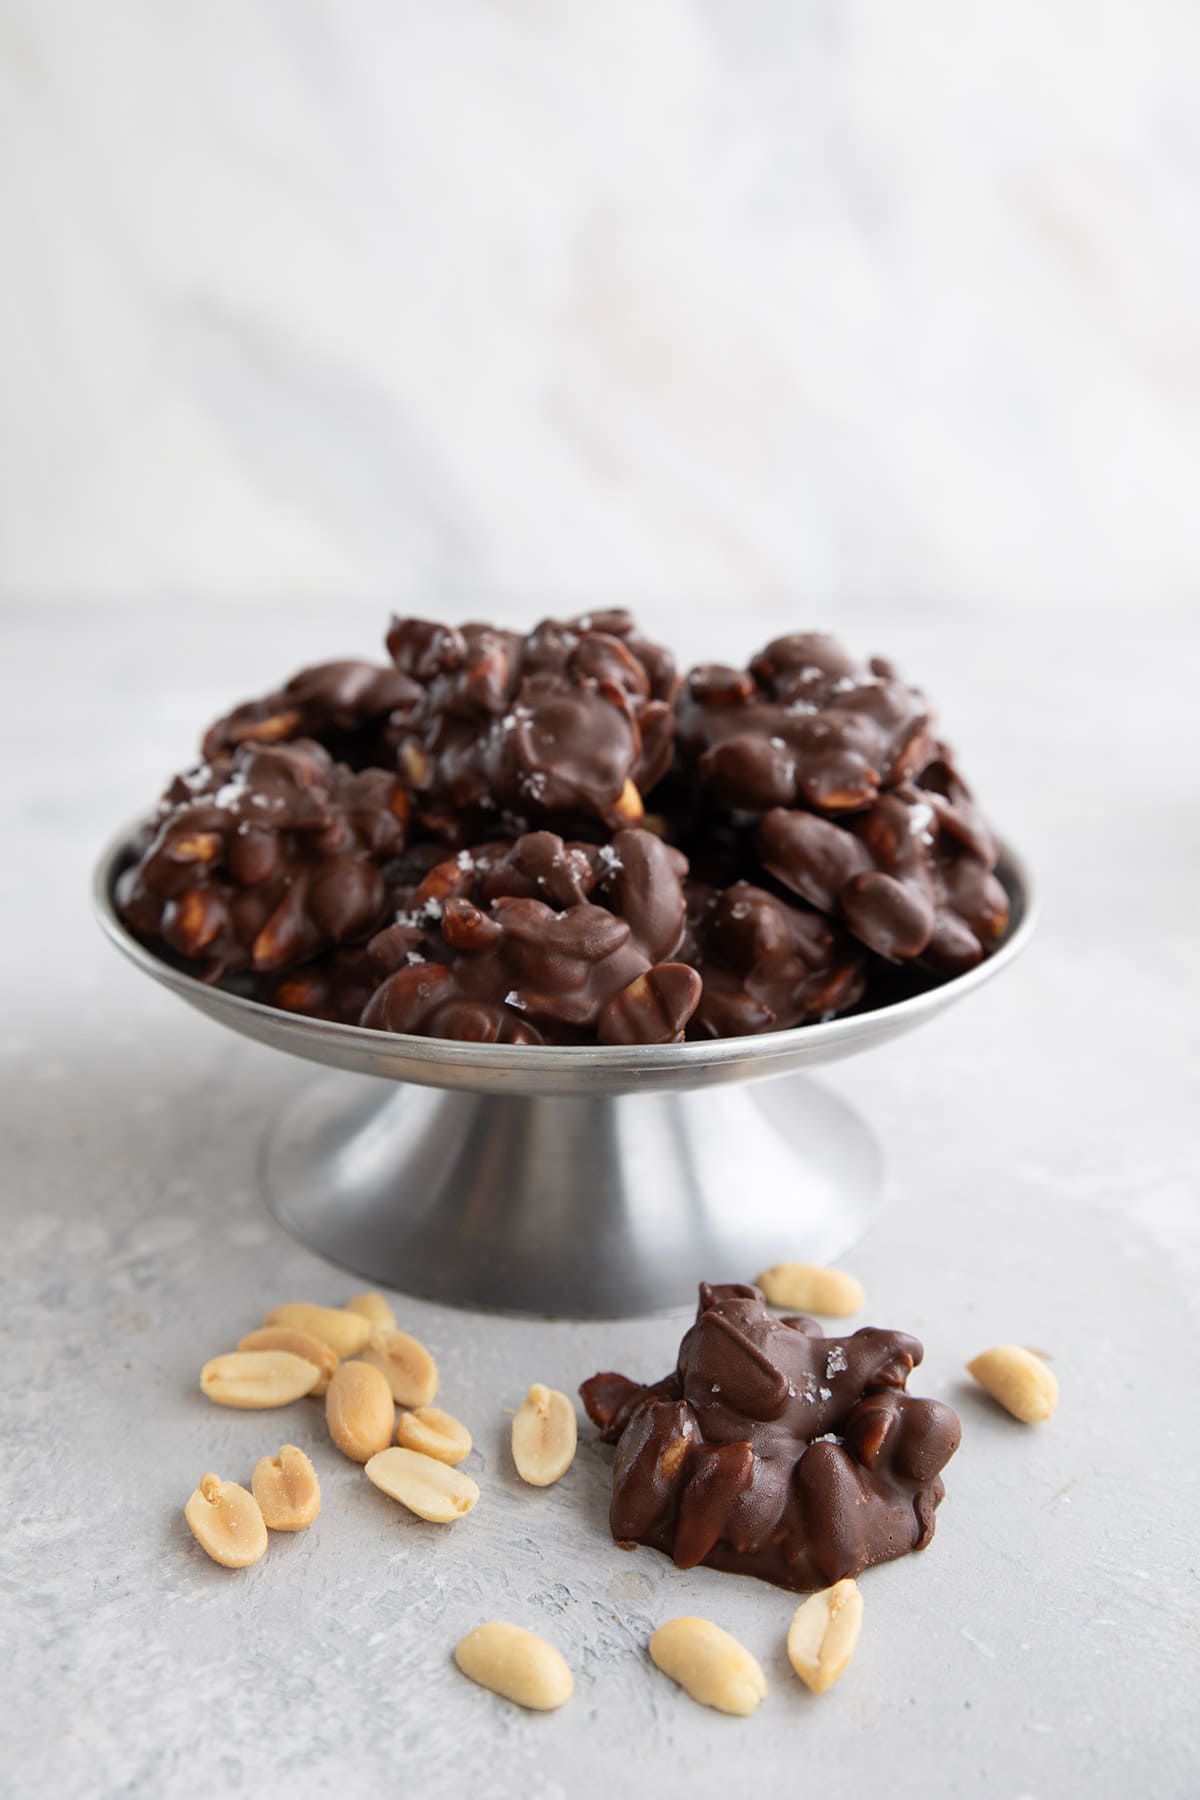 A metal candy dish filled with Keto Peanut Clusters.